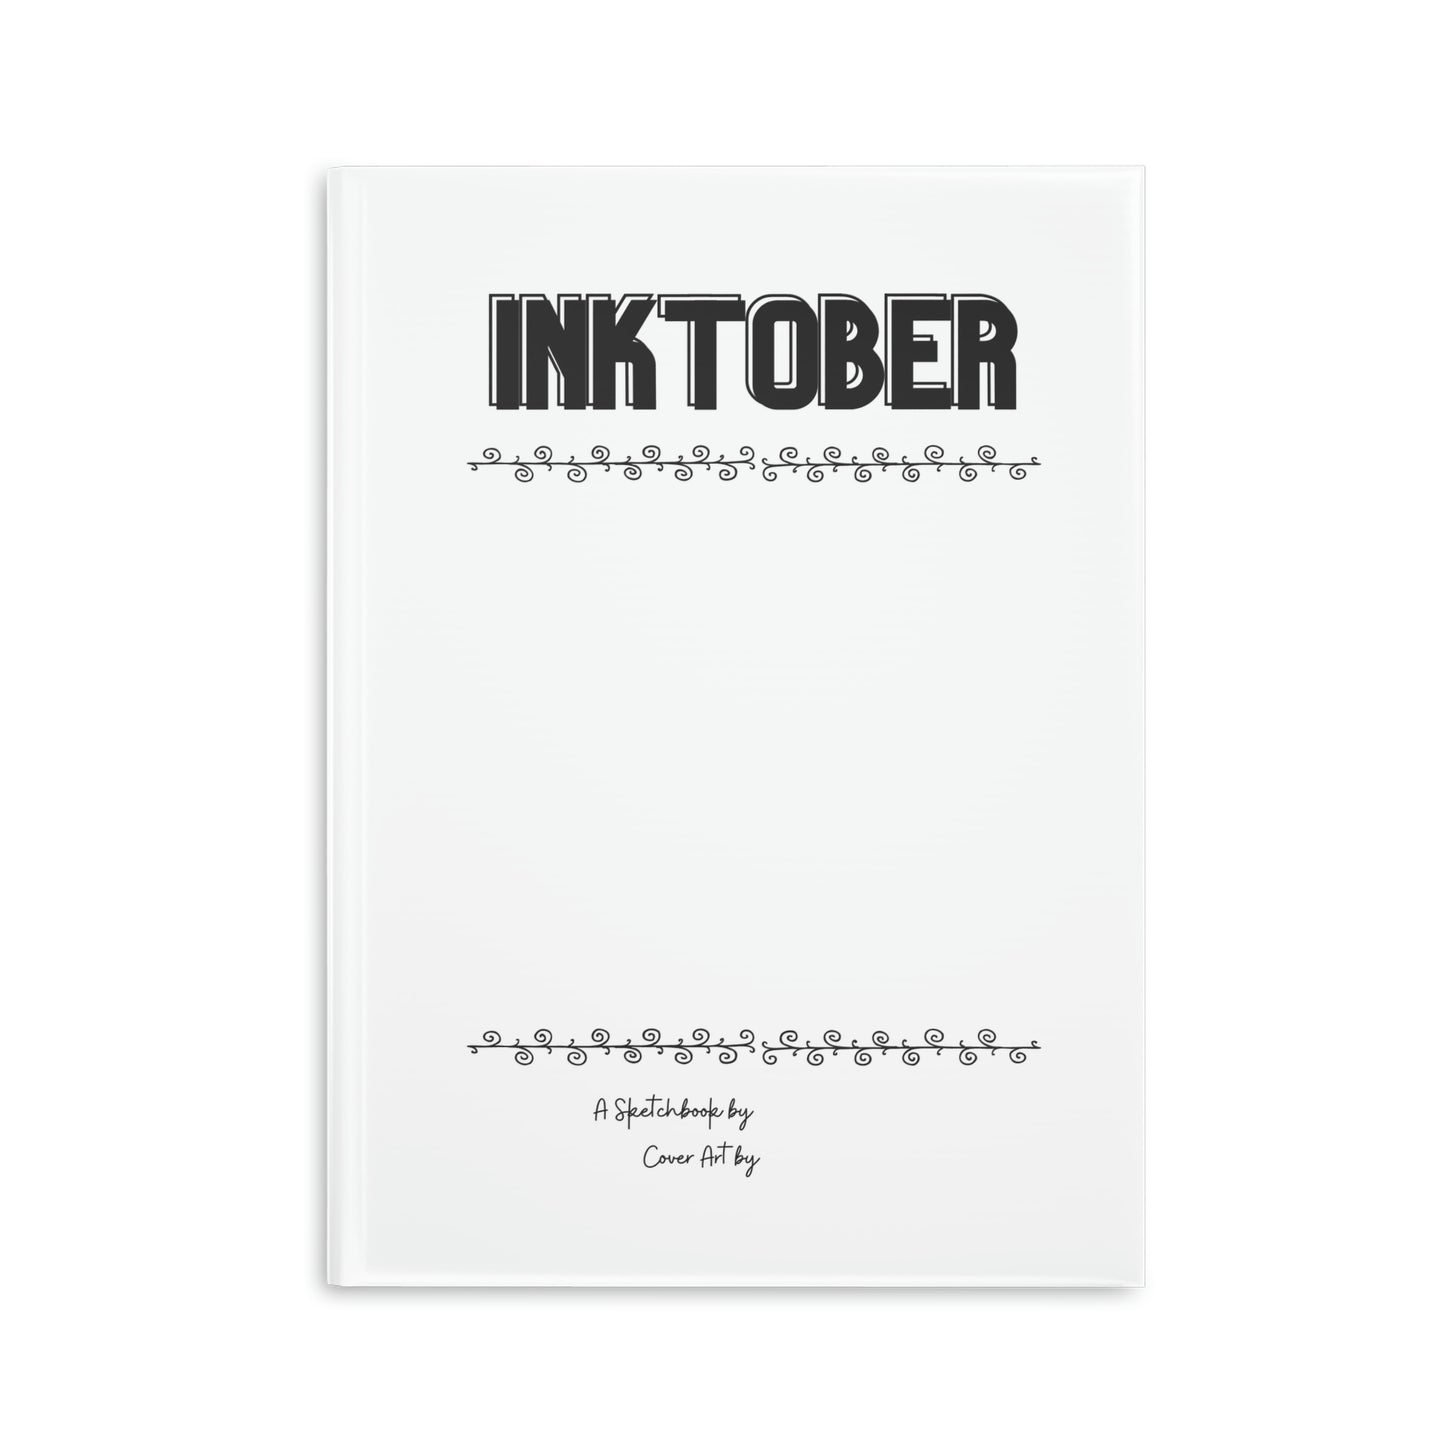 Inktober Hardcover Sketchbook with Puffy Covers